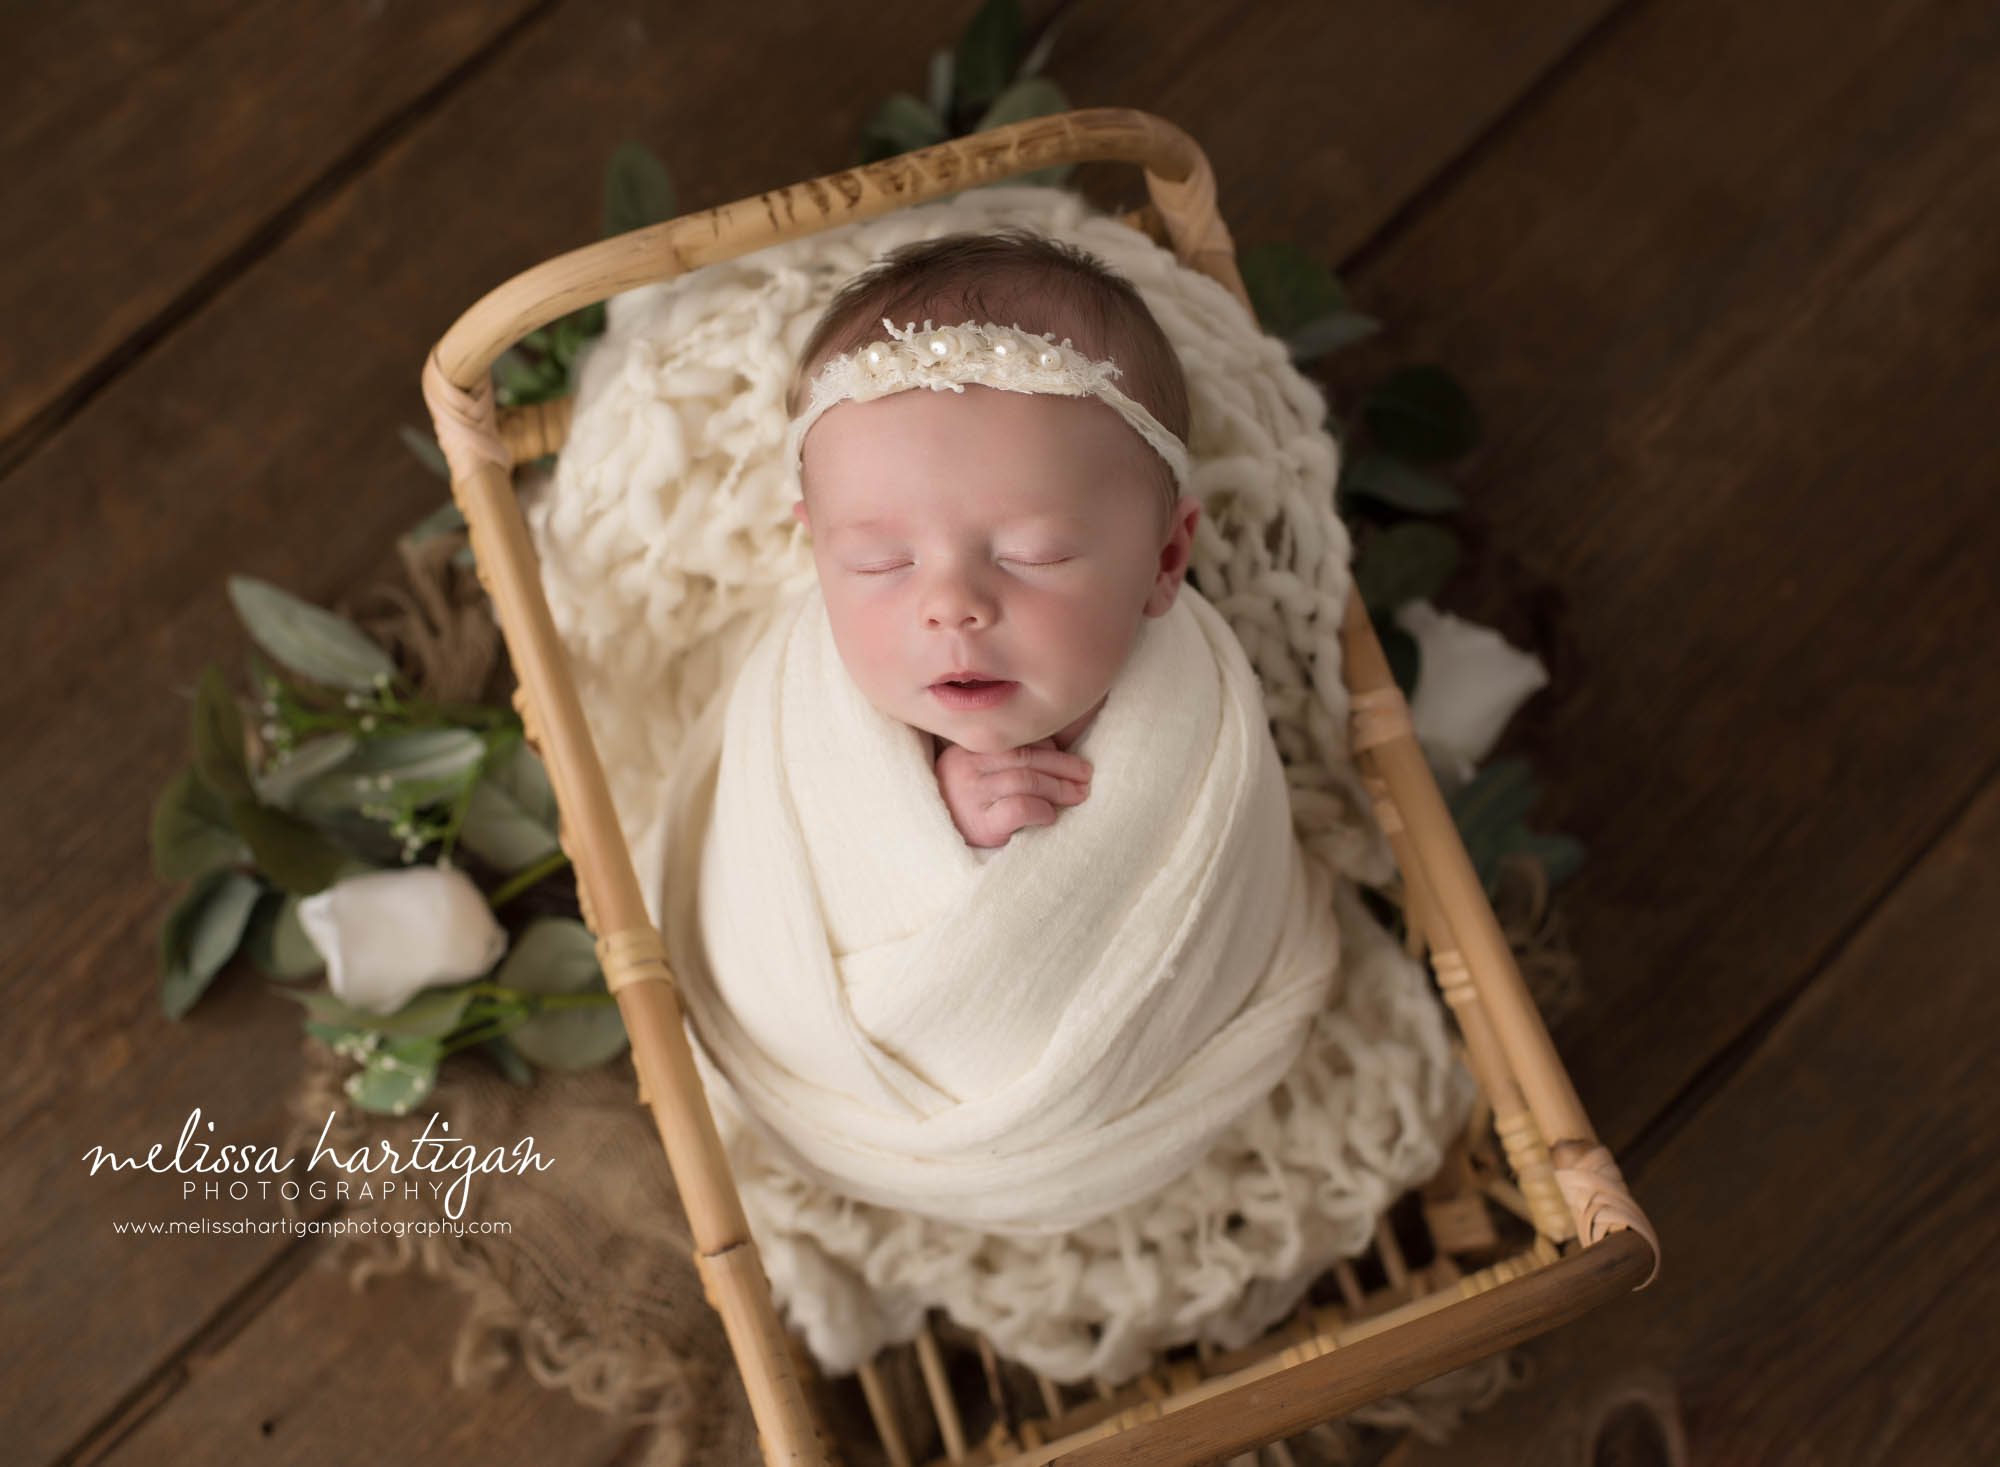 baby girl wrapped in cream wrap with cream newborn headband posed in basket